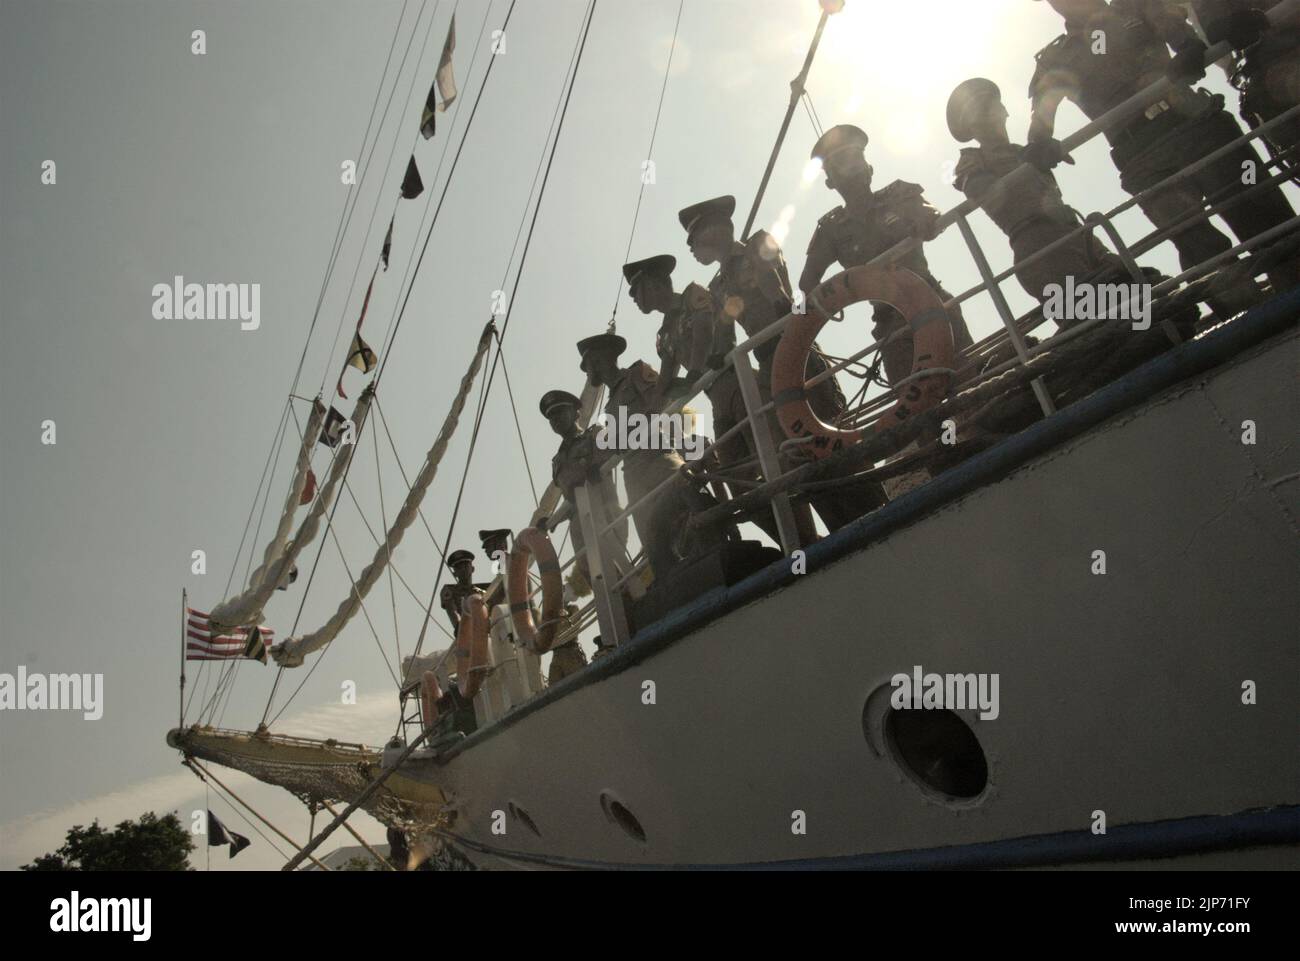 Indonesian navy officers are photographed against a bright sunlight as they are standing on the deck of KRI Dewaruci (Dewa Ruci), an Indonesian tall ship, after the barquentine type schooner is opened for public visitors at Kolinlamil harbour (Navy harbour) in Tanjung Priok, North Jakarta, Jakarta, Indonesia. Stock Photo